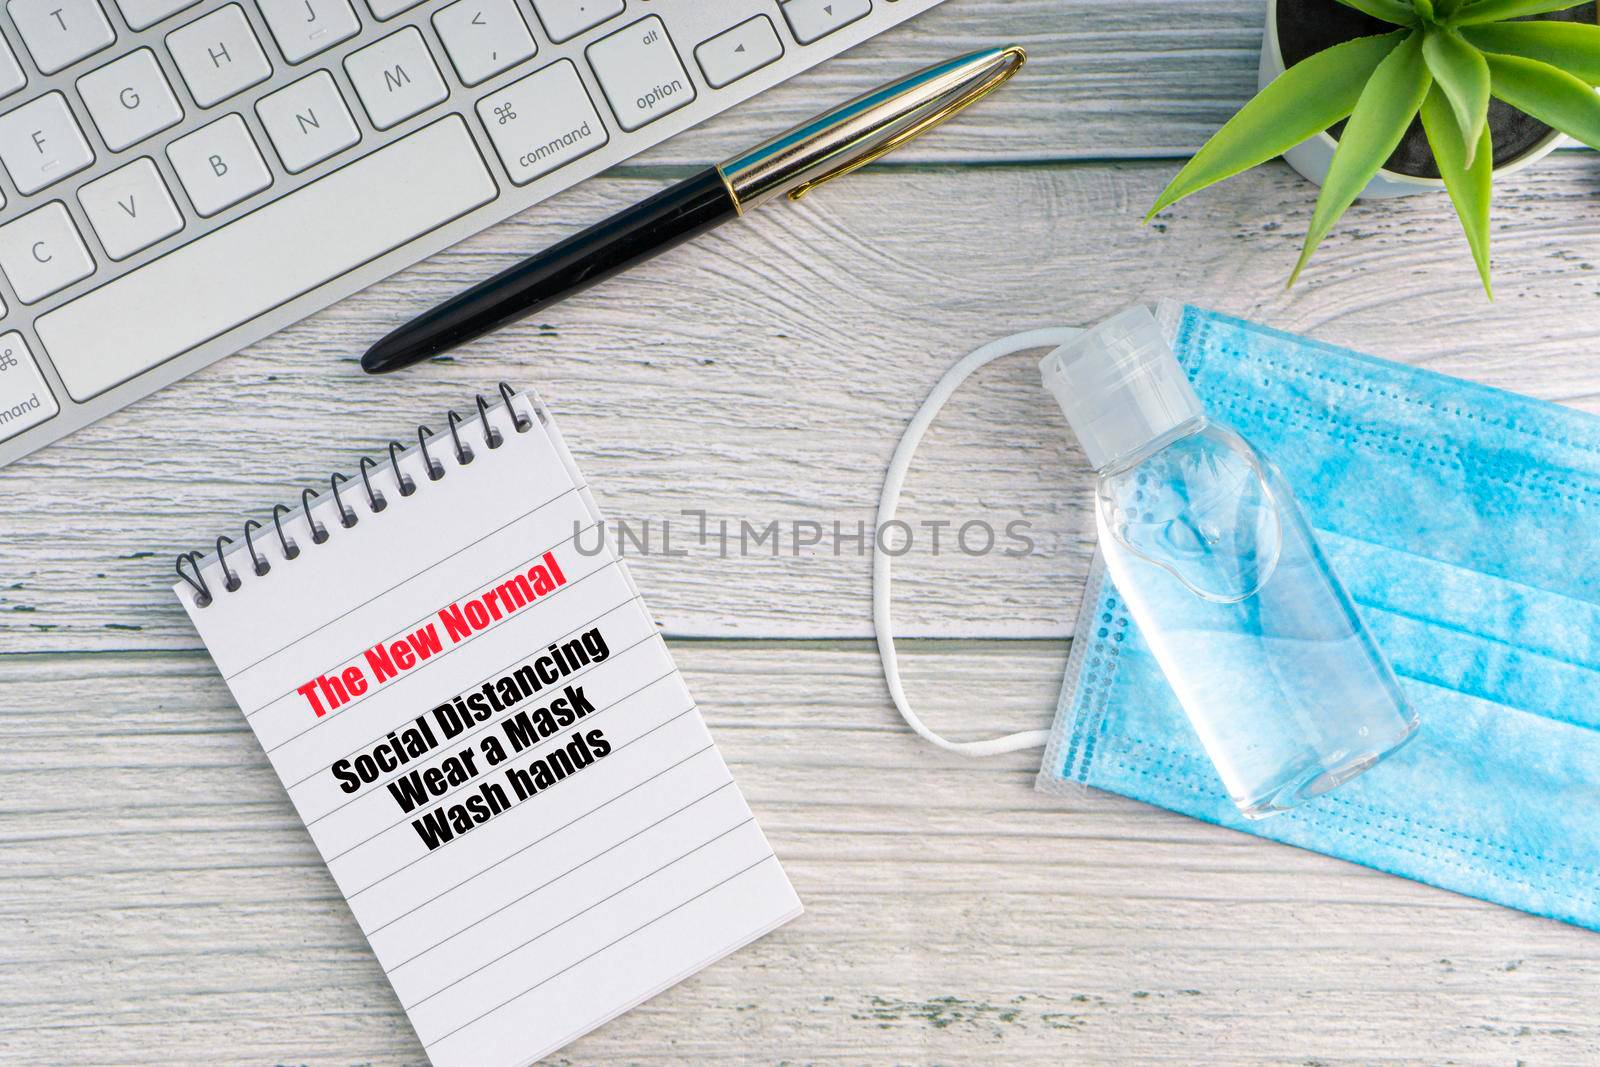 THE NEW NORMAL text with notebook, safety face mask, keyboard, fountain pen, hand sanitizer and decorative plant on wooden background by silverwings